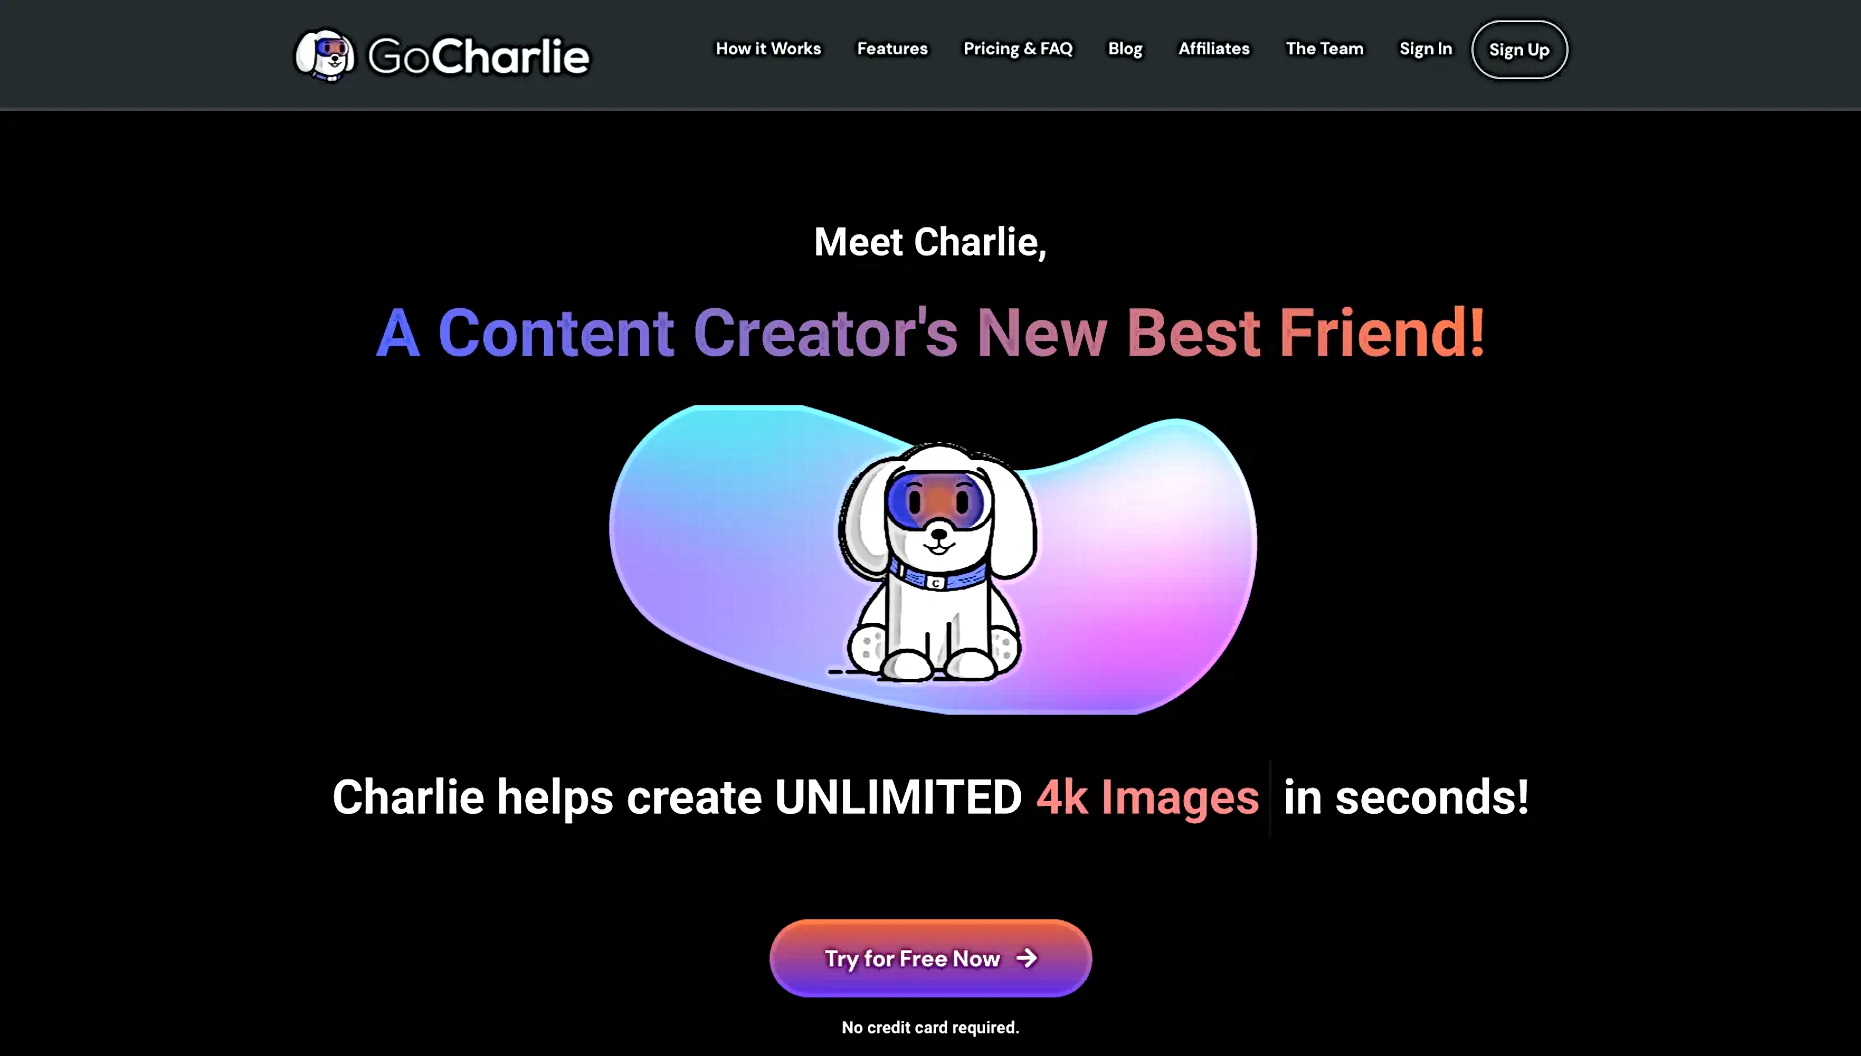 Go Charlie featured